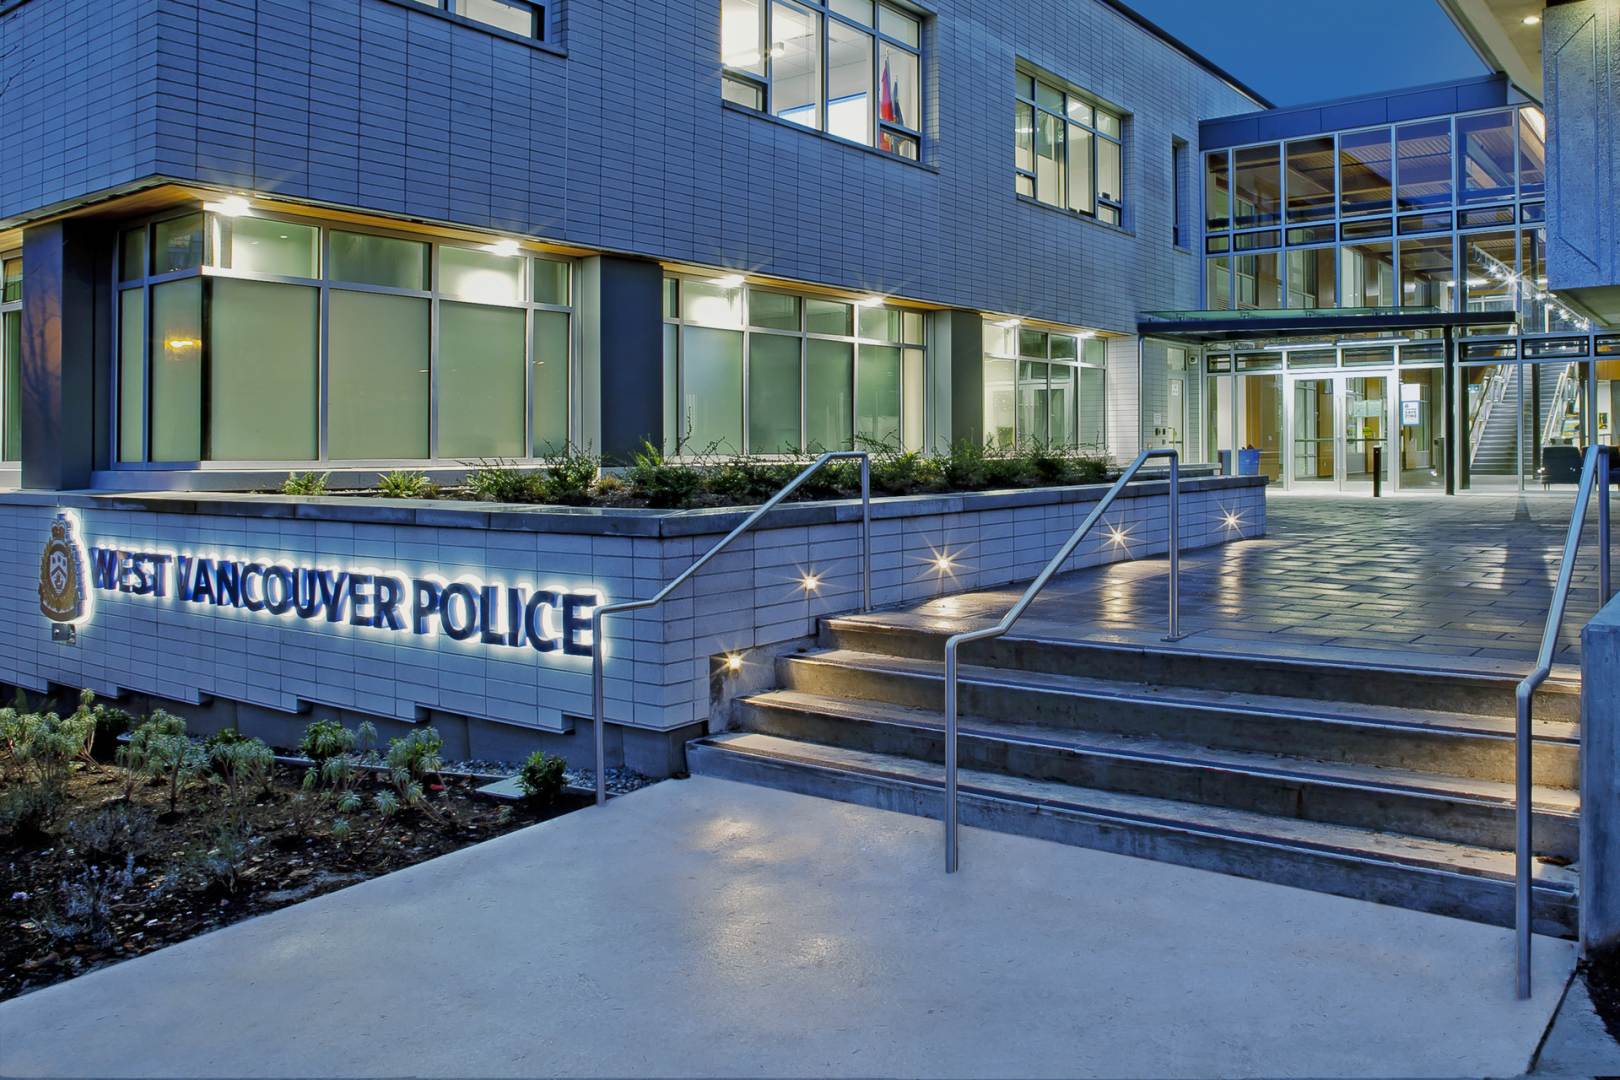 West Vancouver Police Services and Municipal Hall